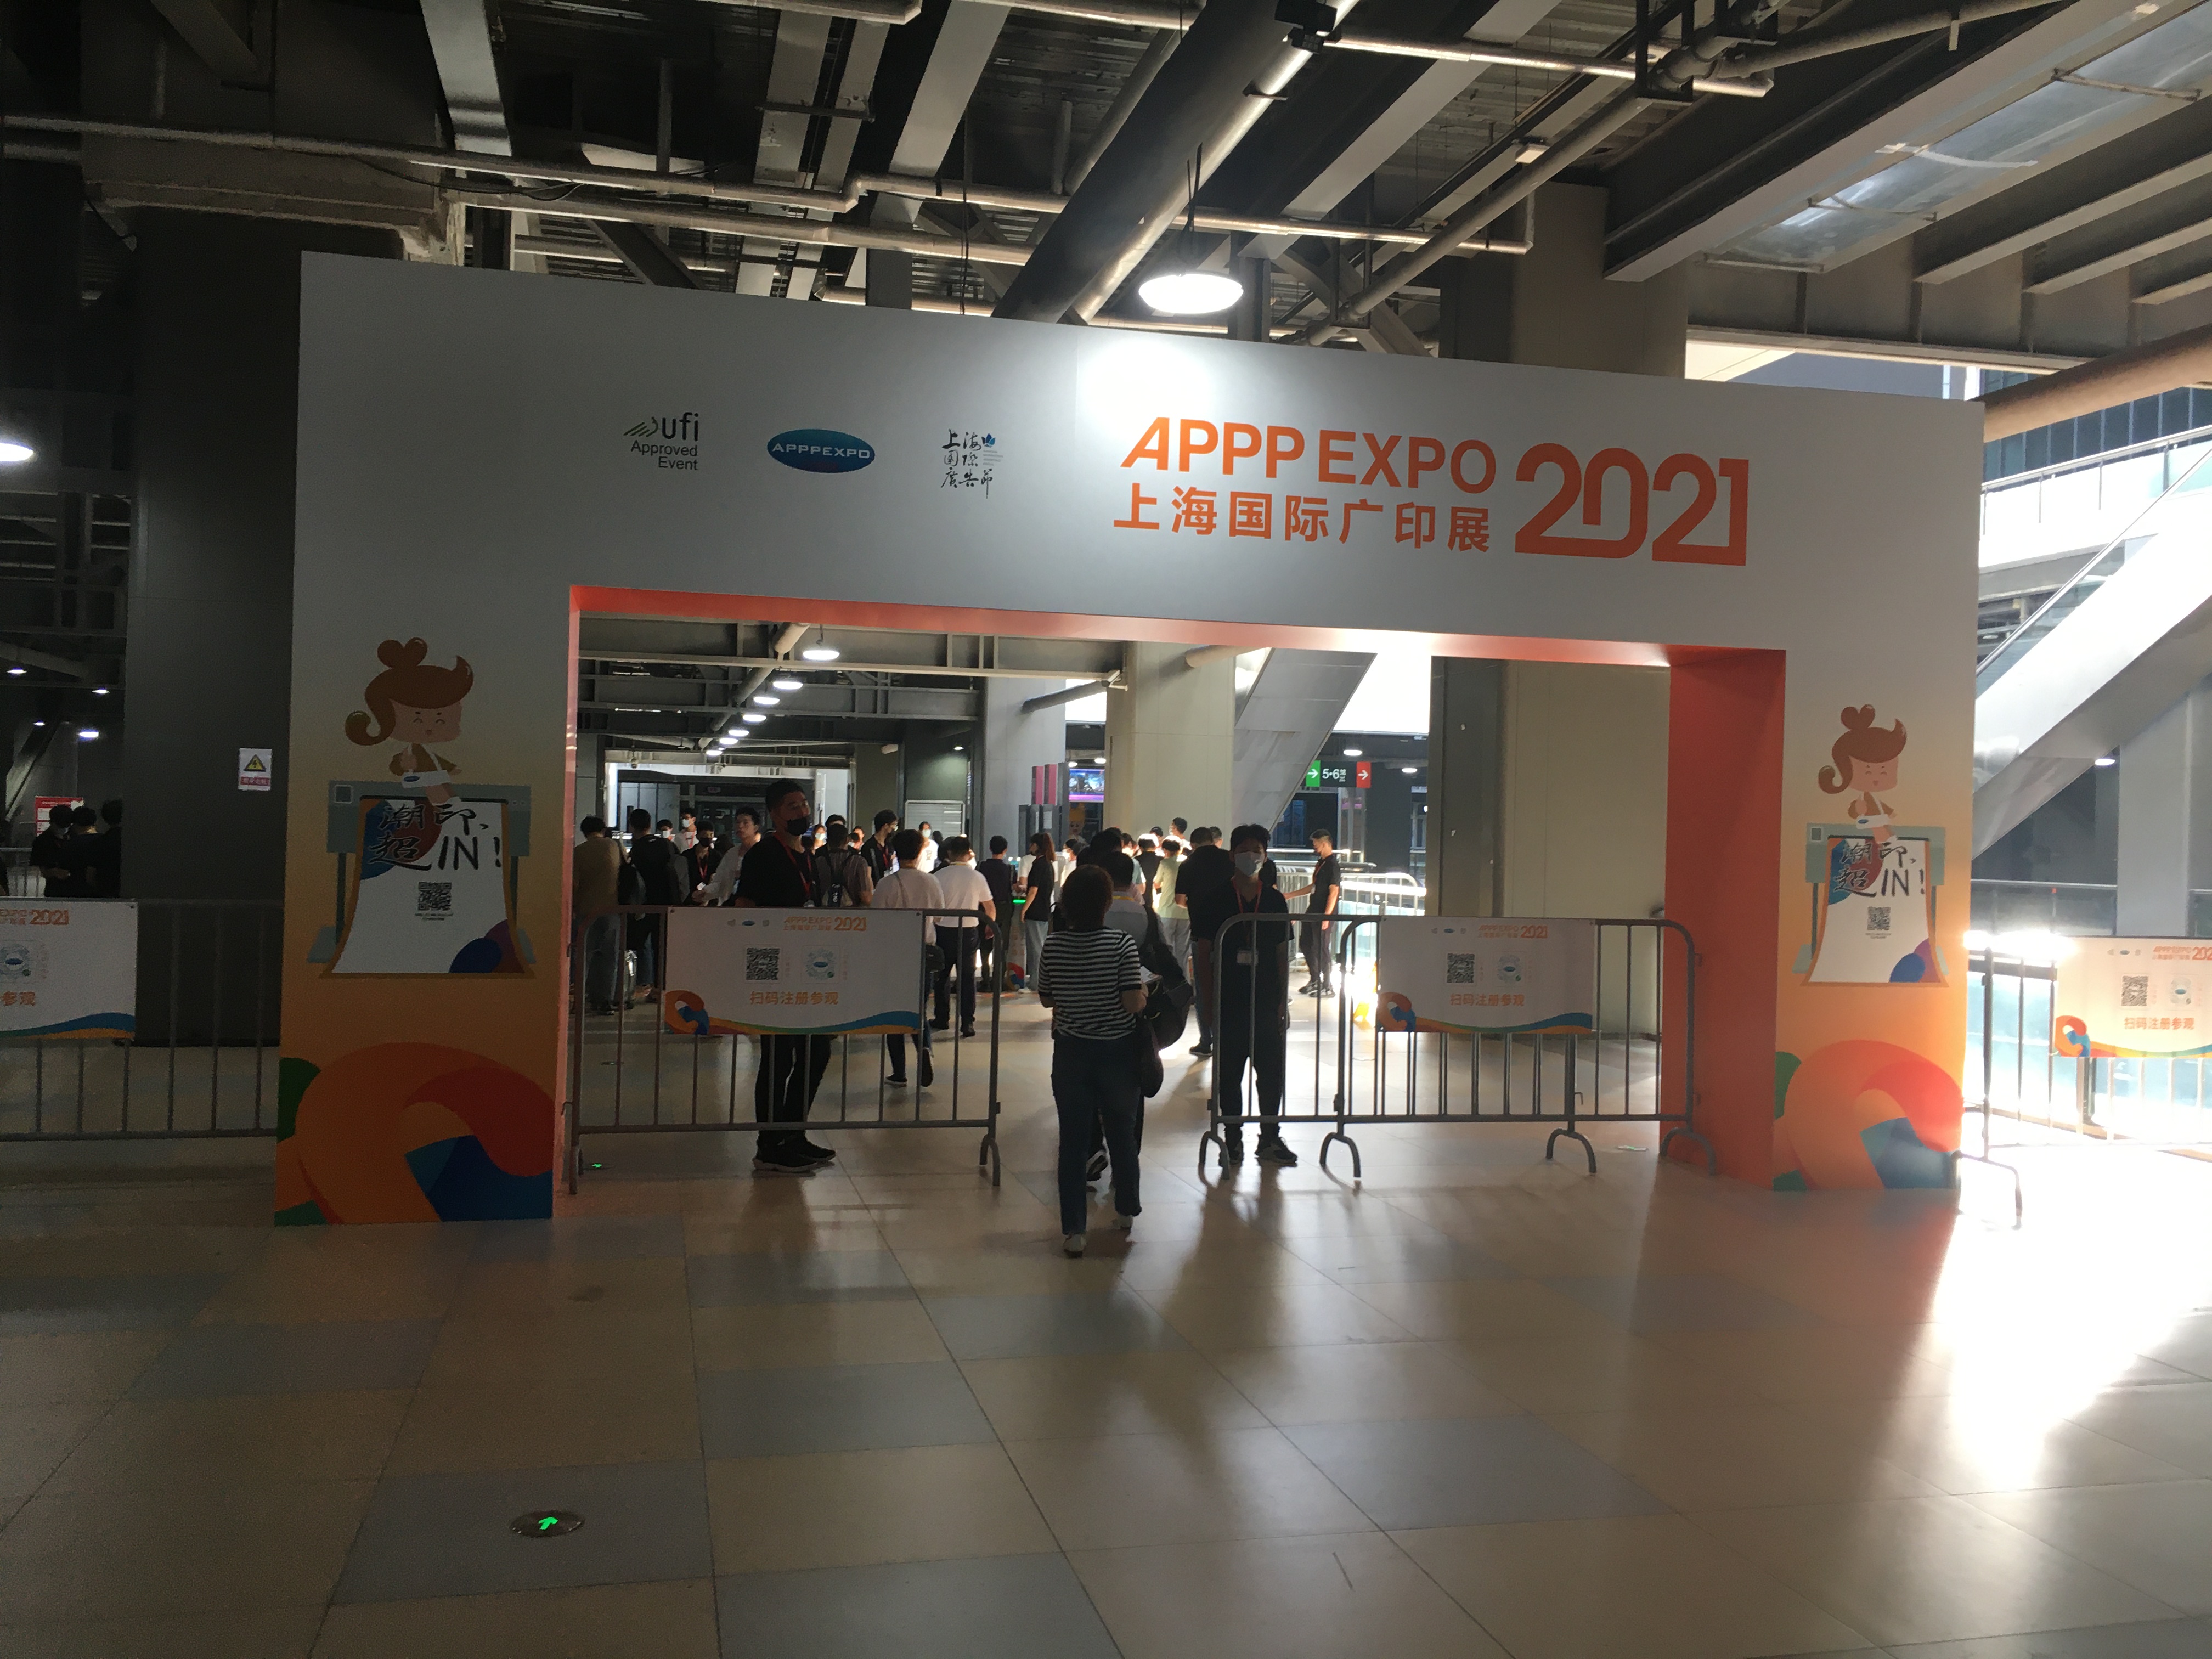 The 29th Shanghai International Ad & Sign Technology & Equipment Exhibition